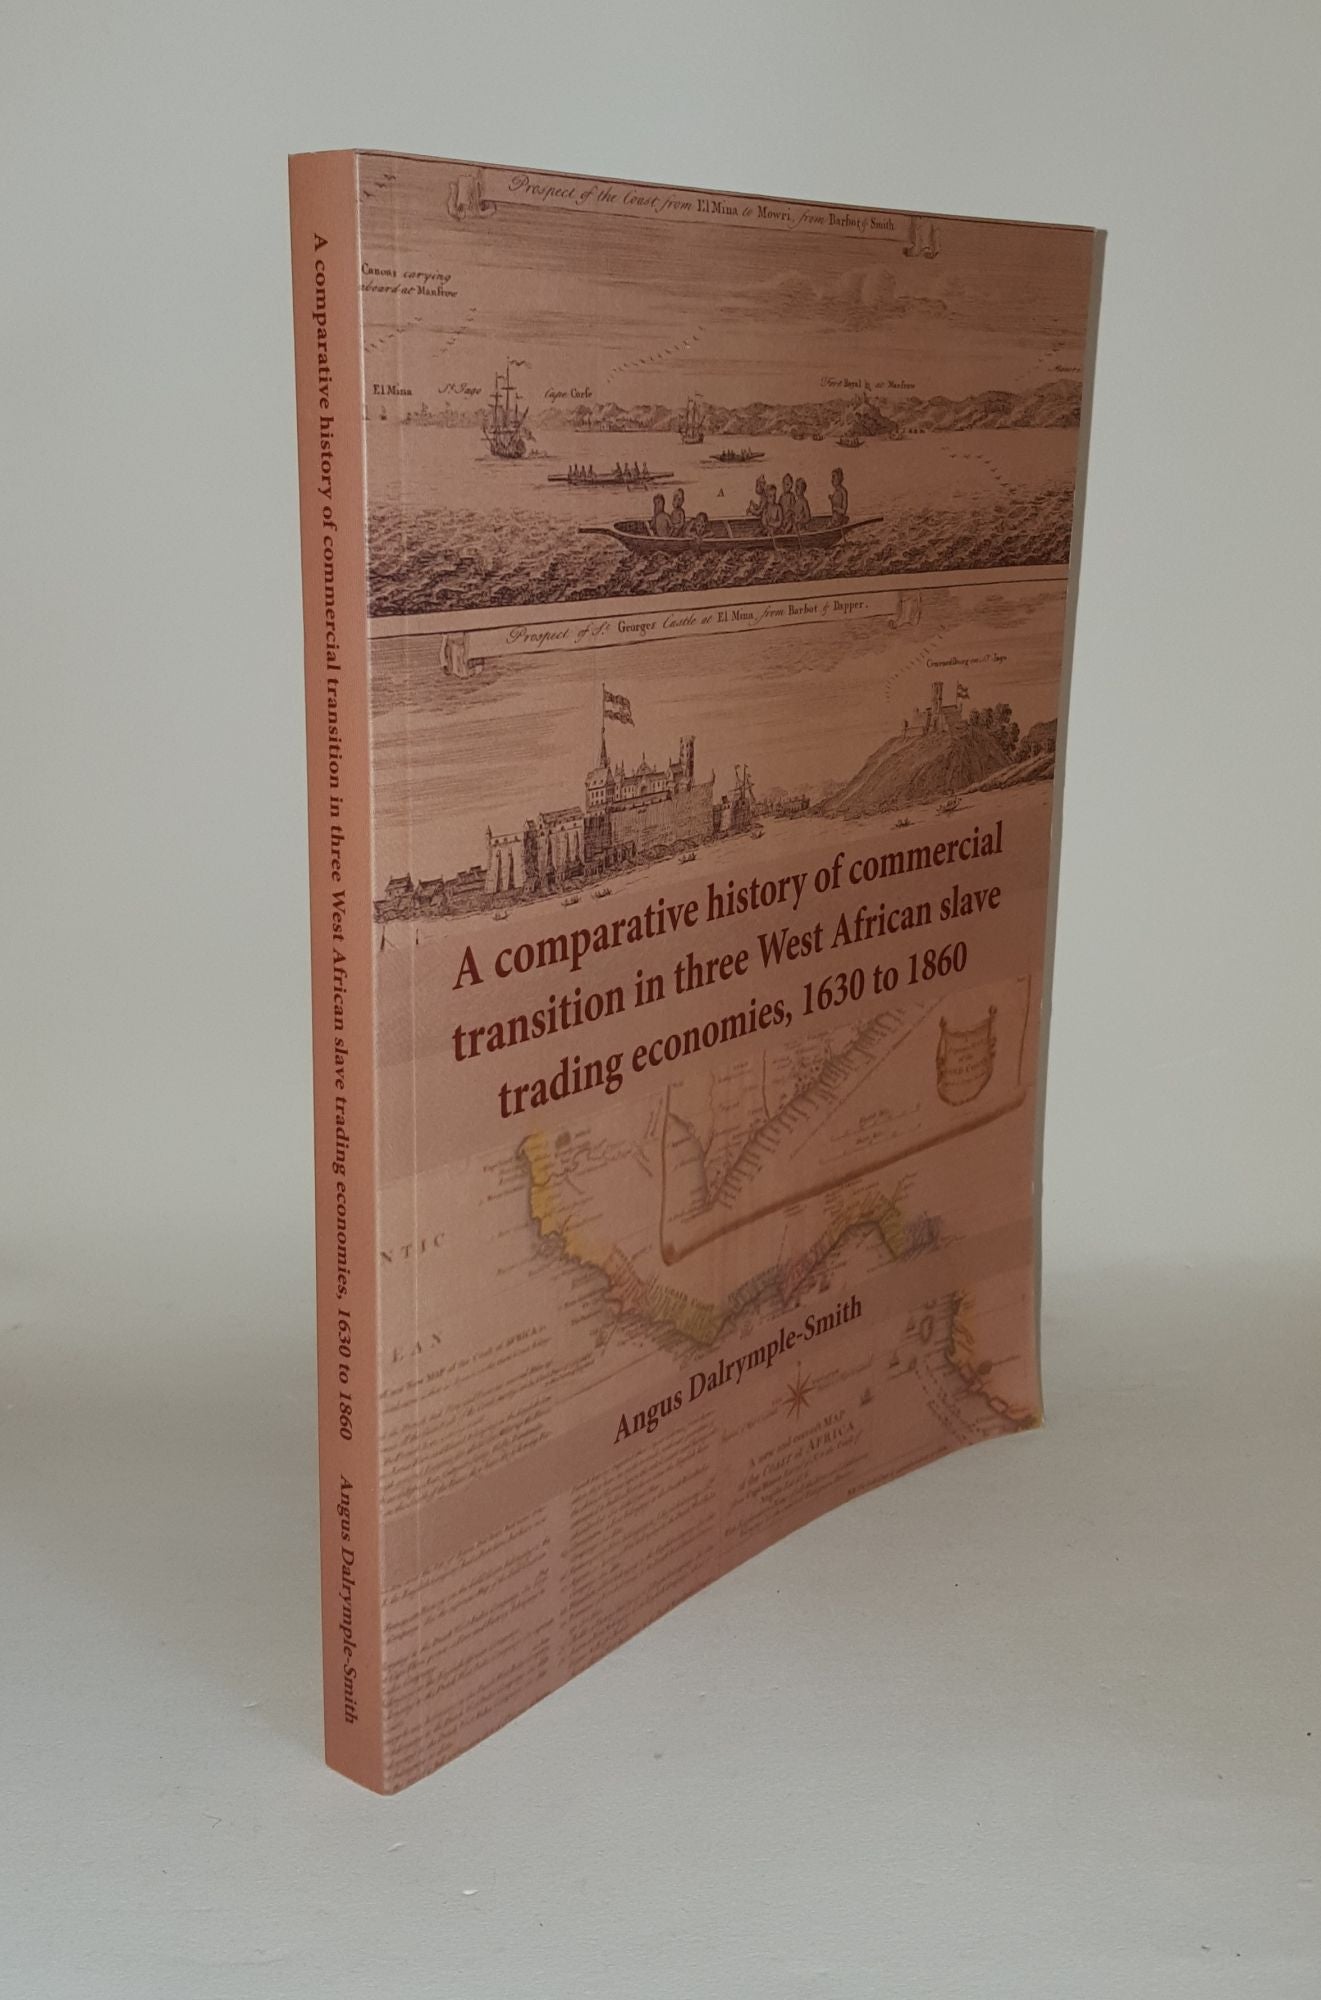 DALRYMPLE-SMITH Angus - A Comparative History of Commercial Transition in Three West African Slave Trading Economies 1630 - 1860